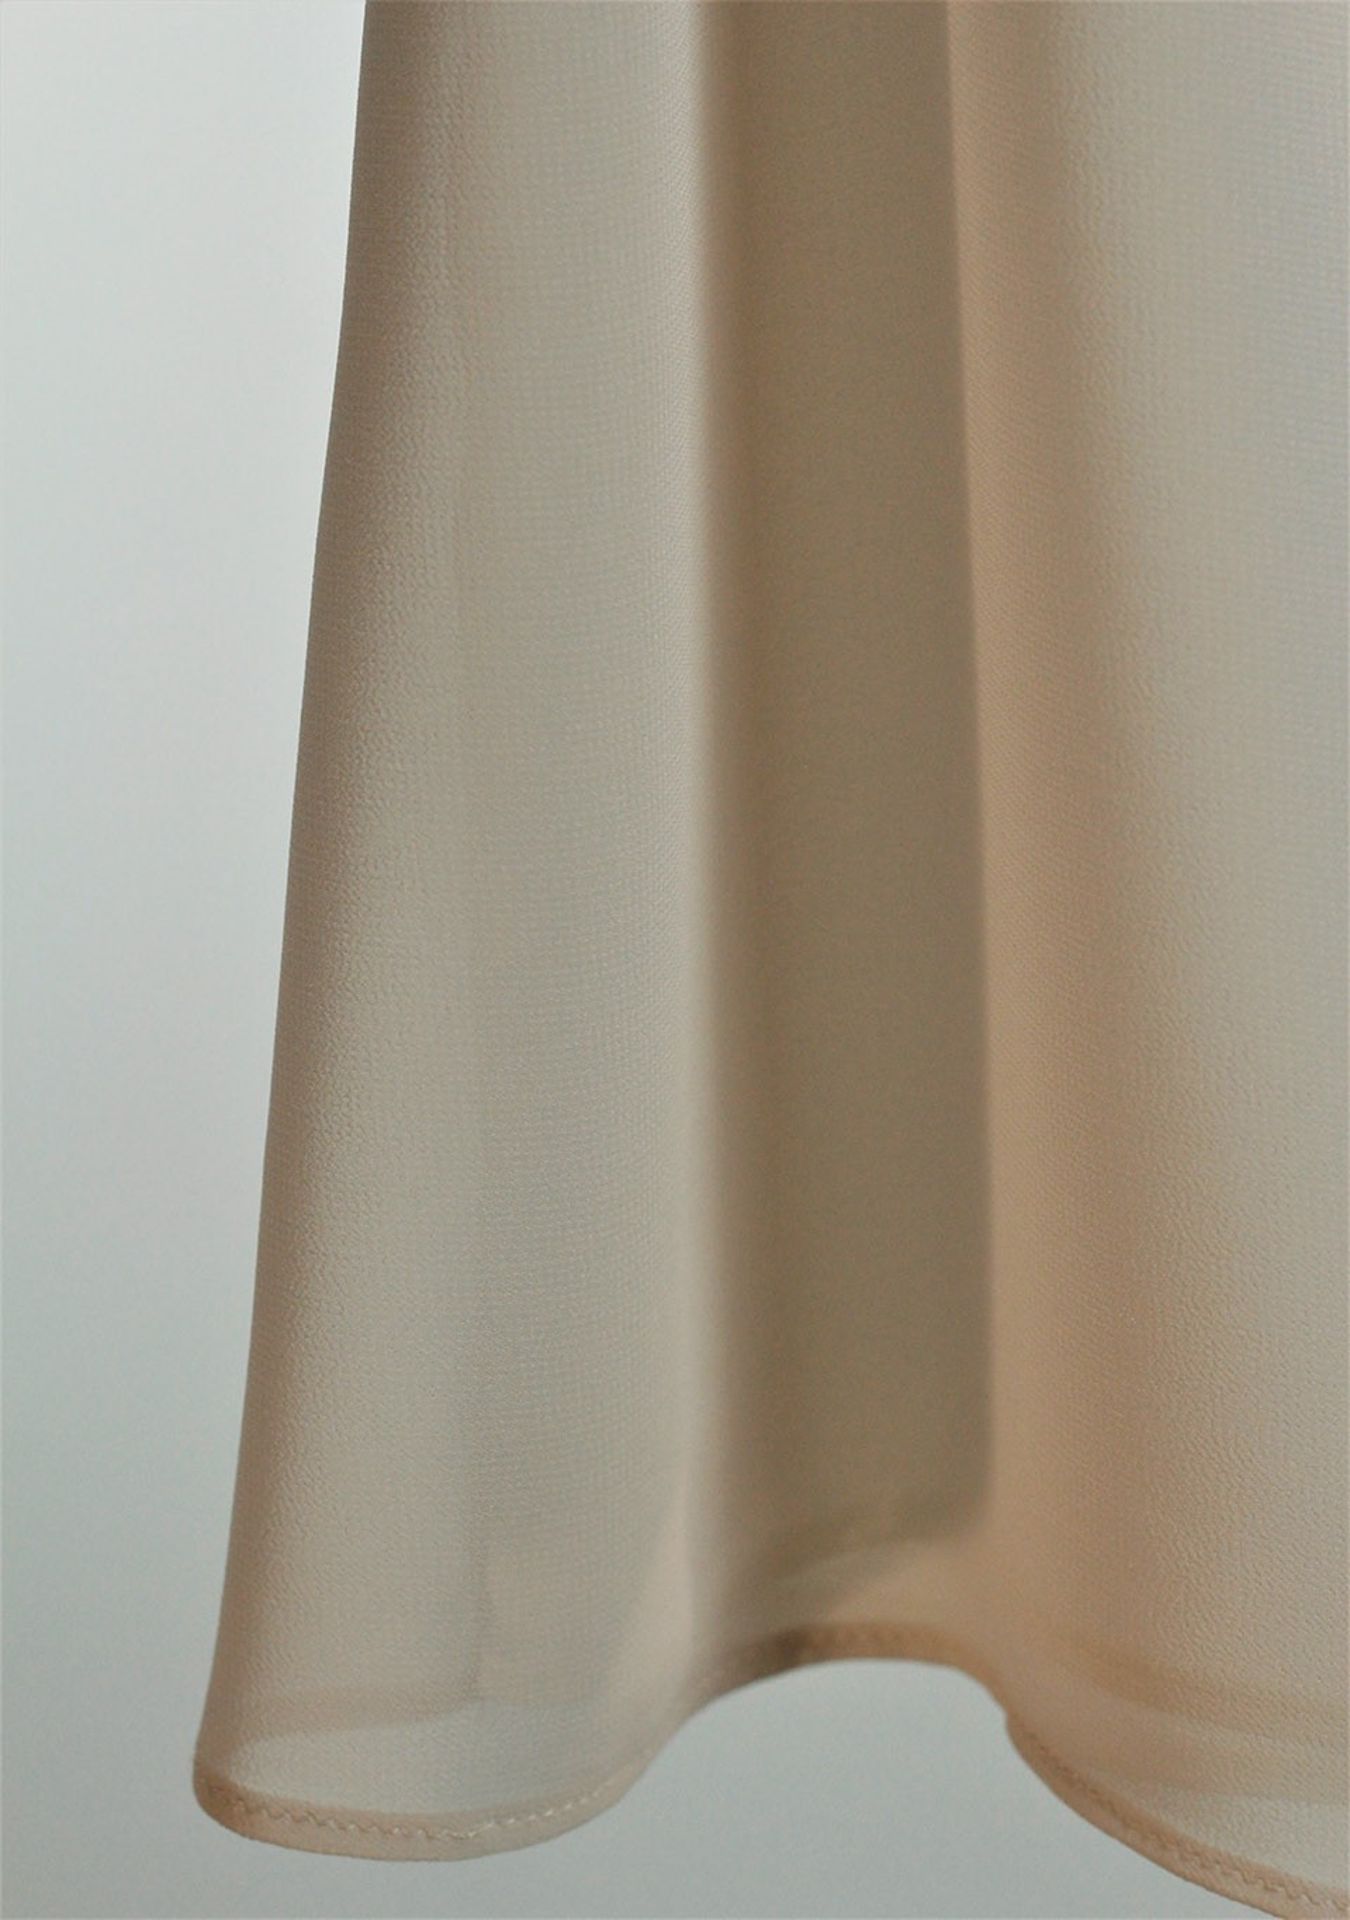 1 x Boutique Le Duc Pearl Pink Skirt - From a High End Clothing Boutique In The - Image 3 of 10